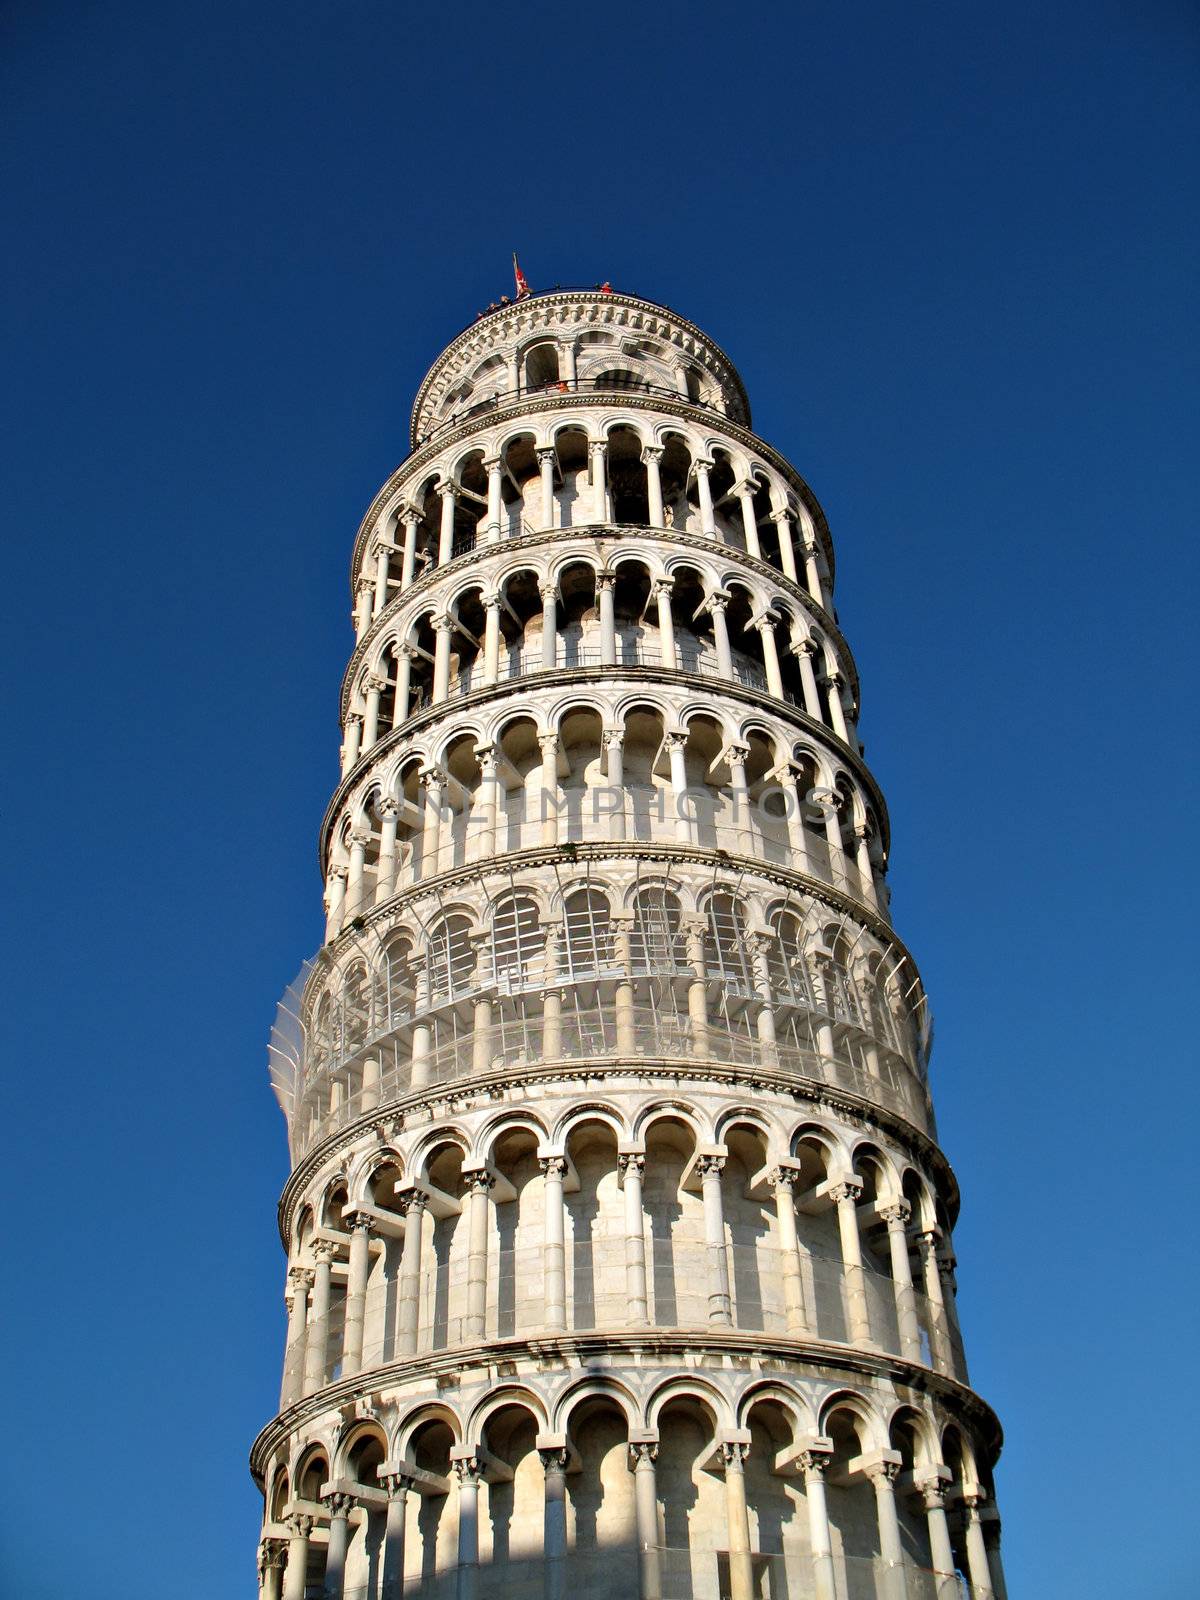 A view of the tower of Pisa, Italy